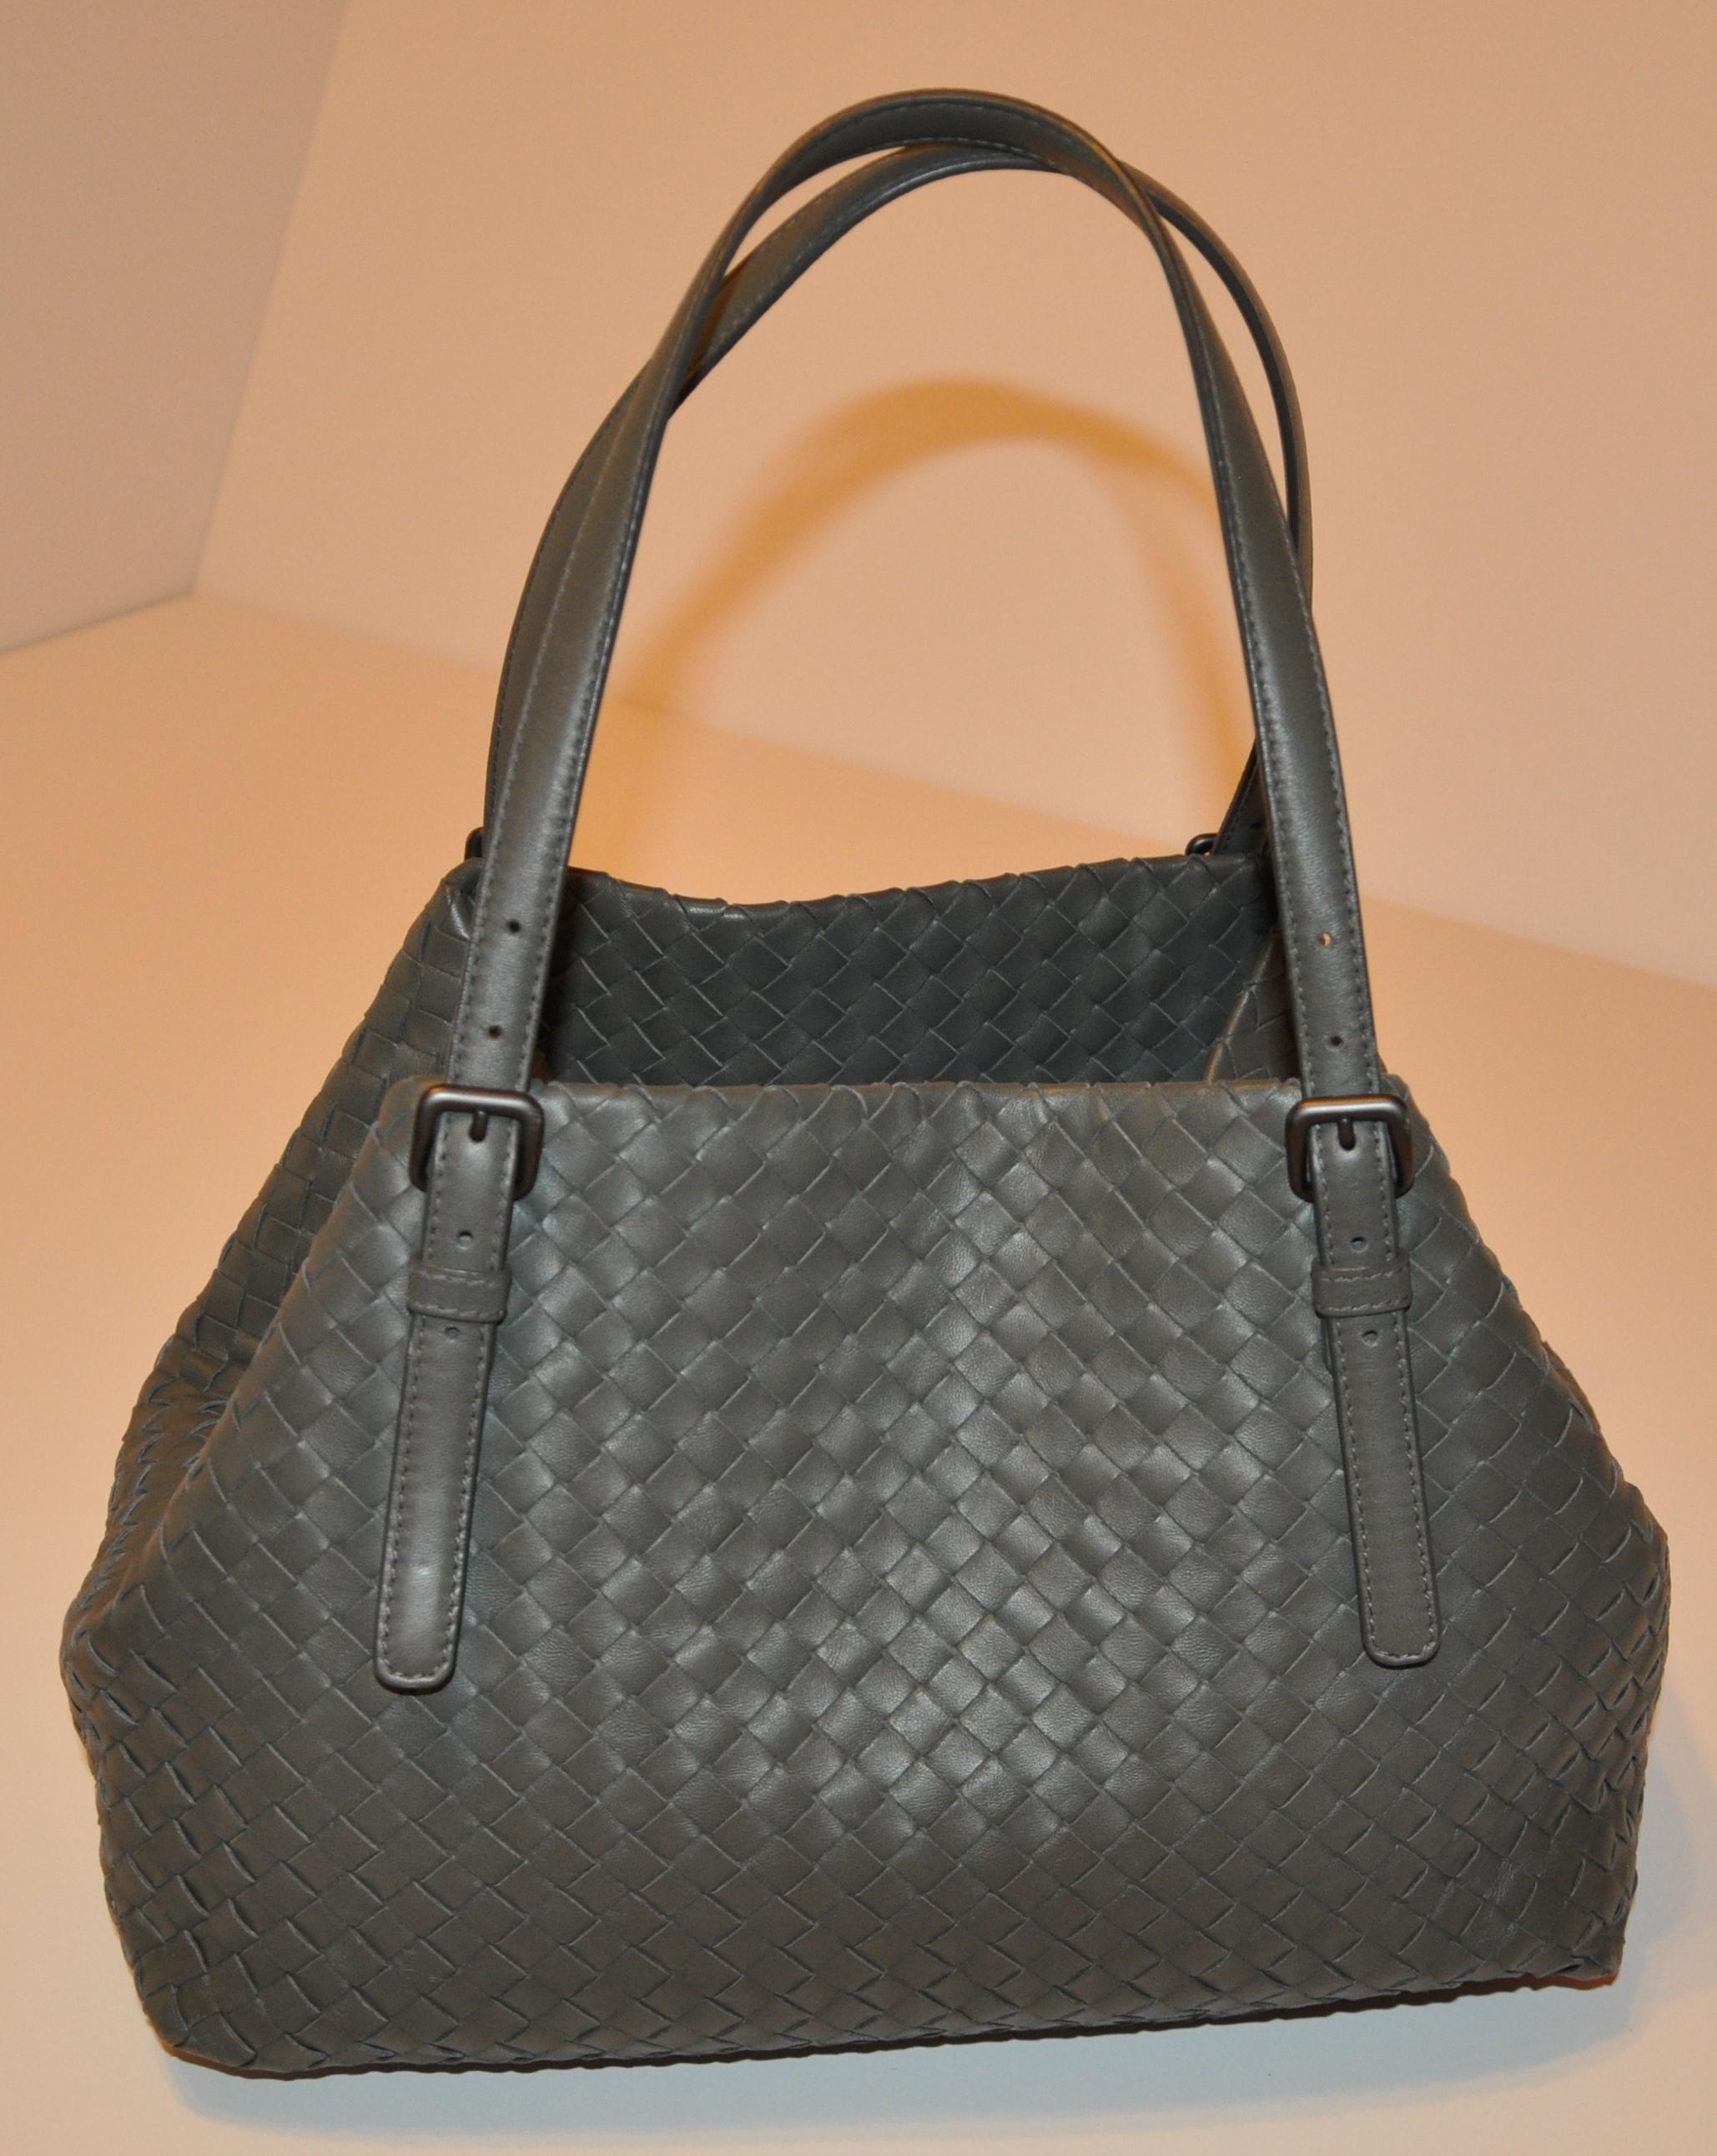        Bottega Veneta Signature rich taupe lambskin woven double-handle shoulder bag features adjustable shoulder straps which measures 15 1/2 inches to 22 1/2 inches. There is an additional 6 inches which can be lengthen if needed, after, having